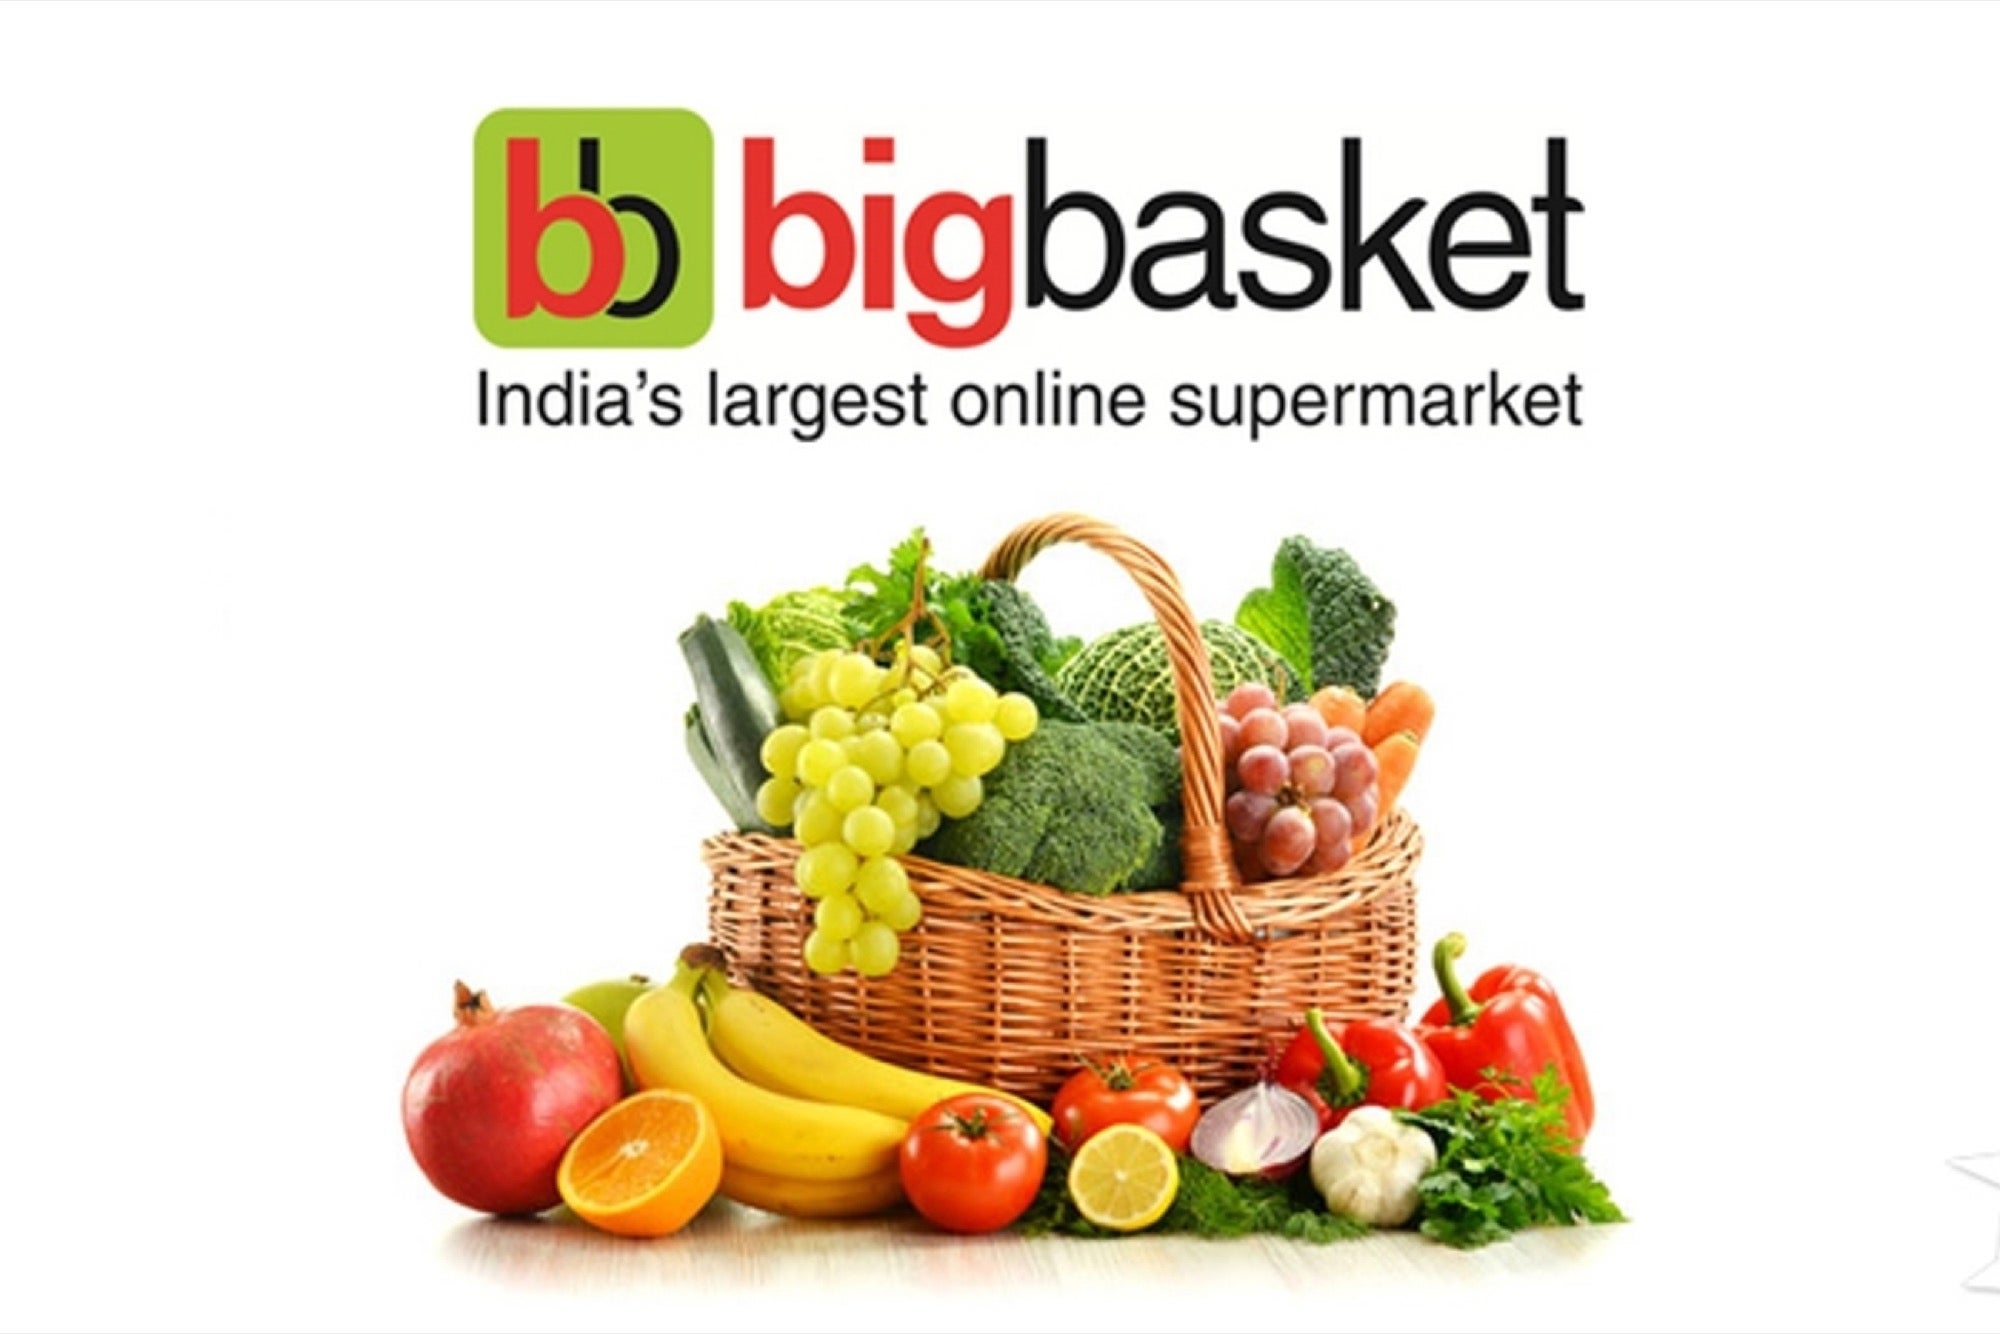 Tatas may tie-up with Online Grocery Store “Big Basket”